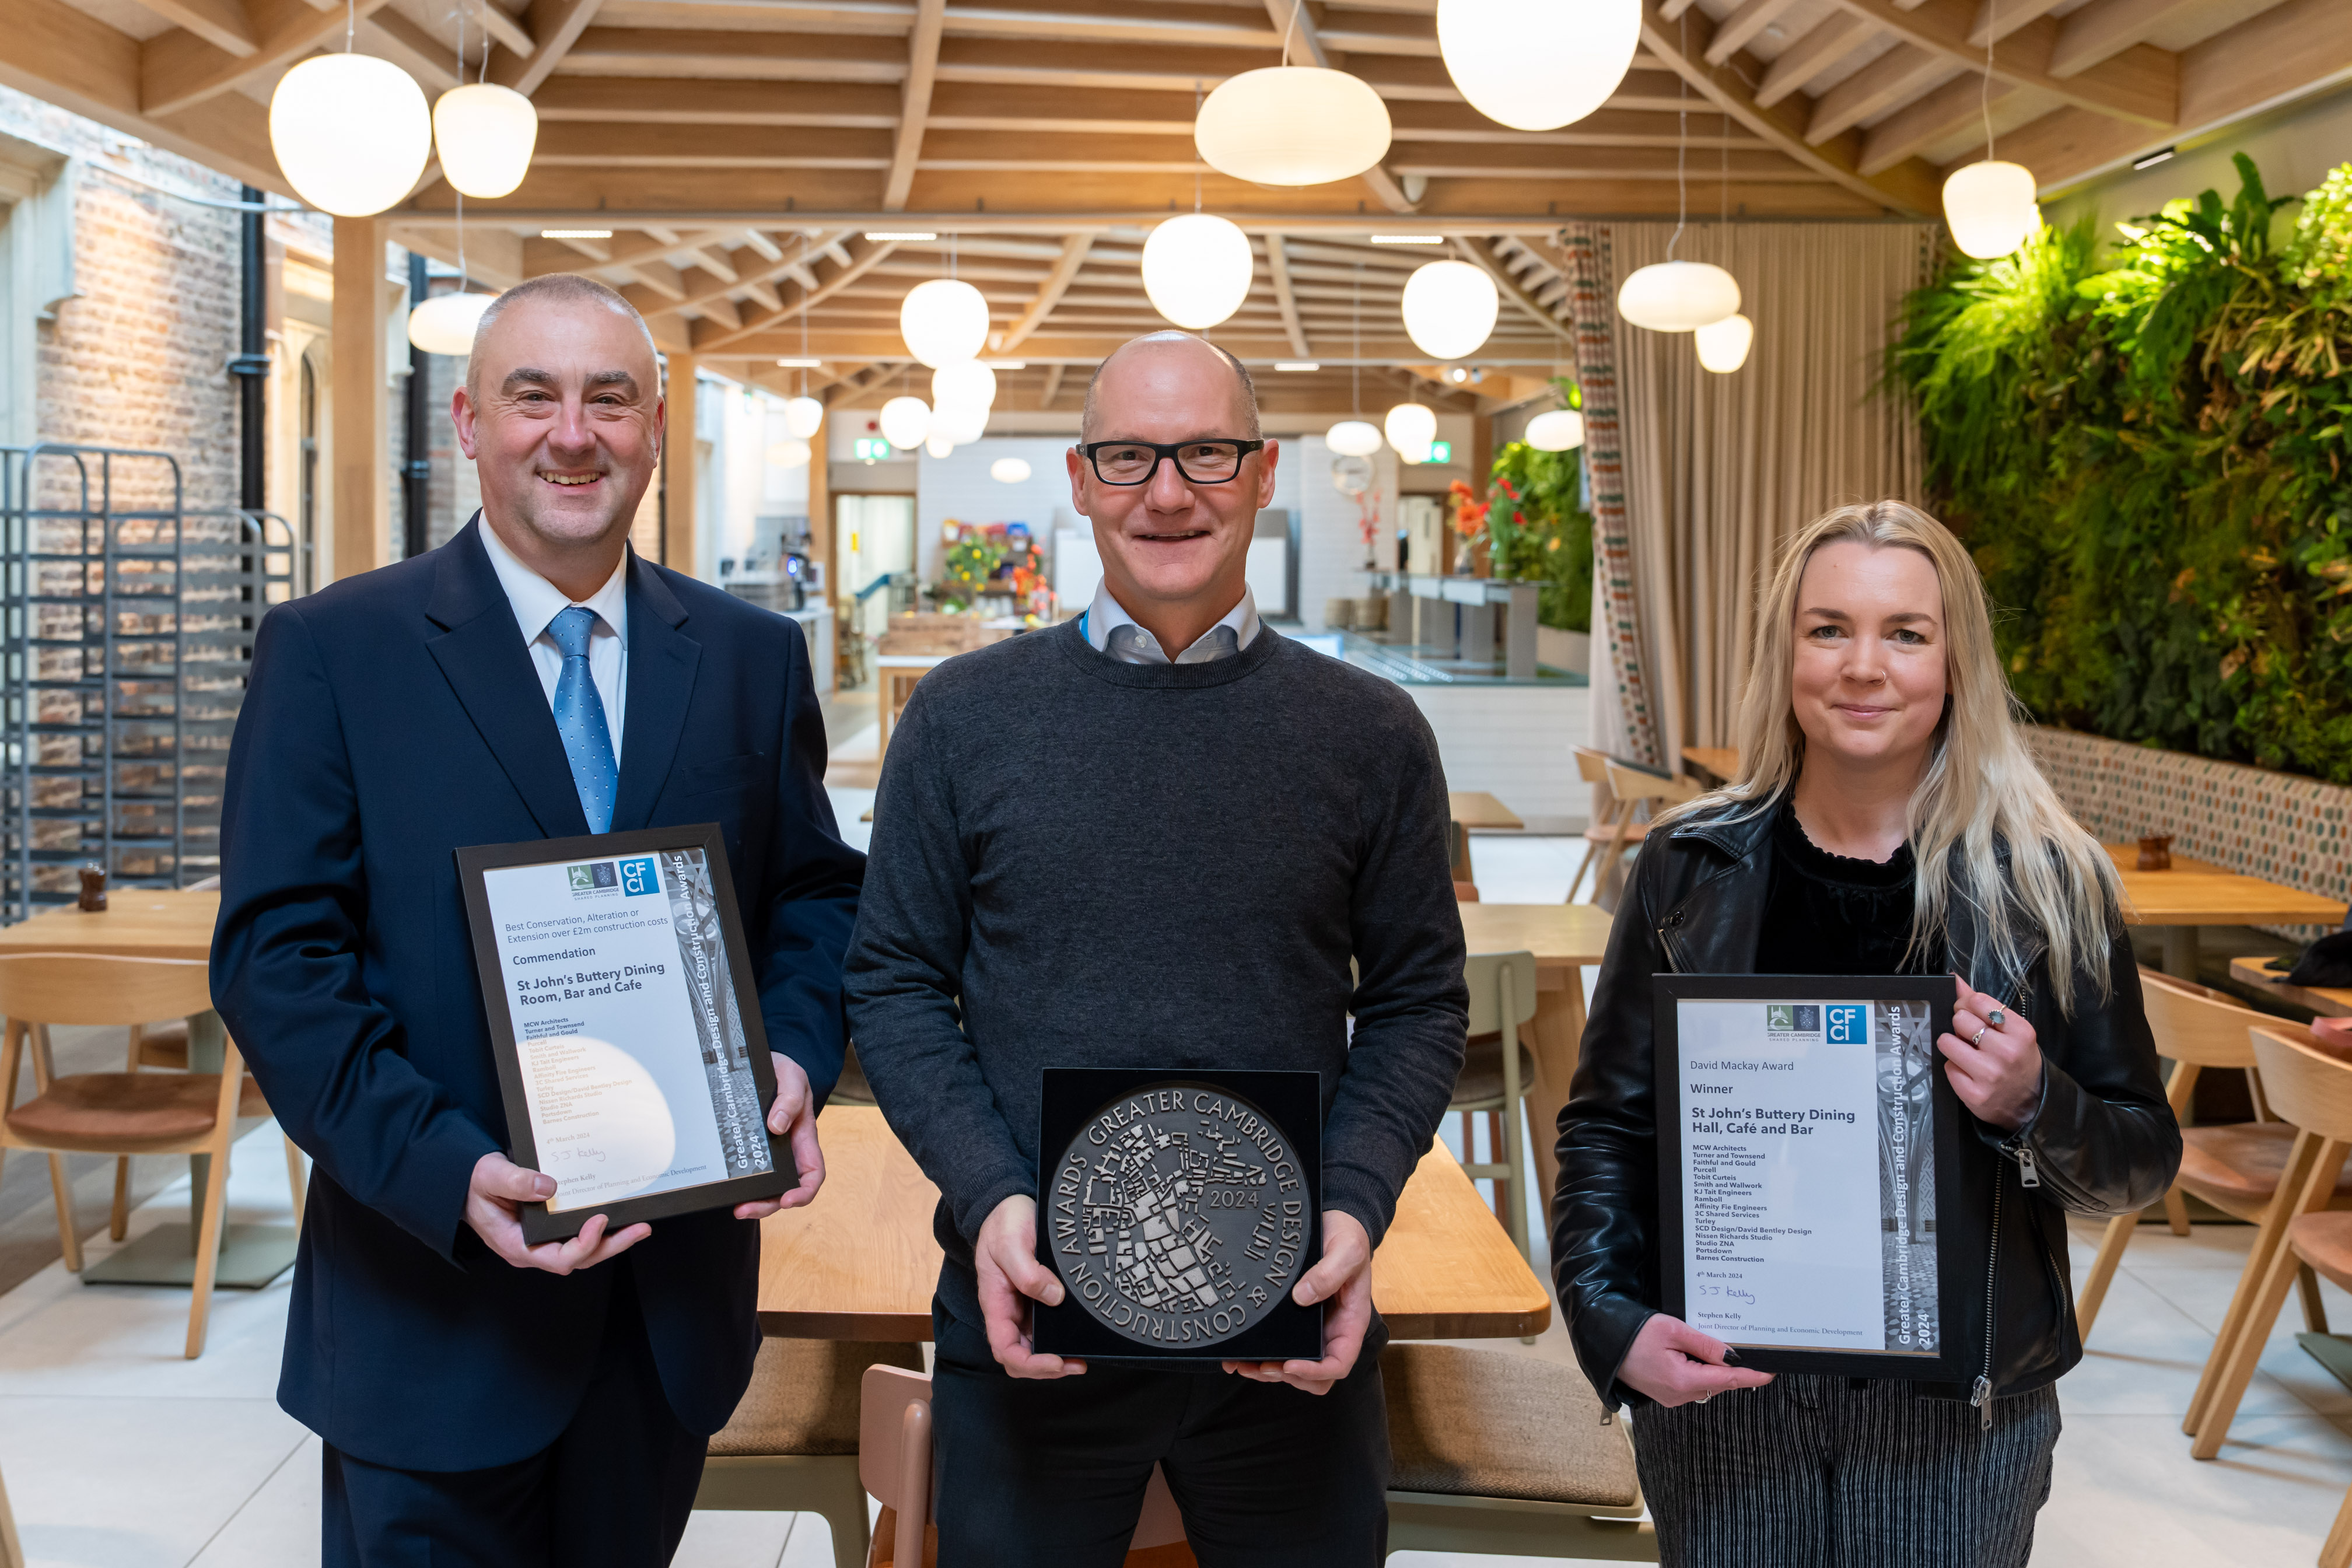 Three members of staff in the new Buttery with the award and certificates